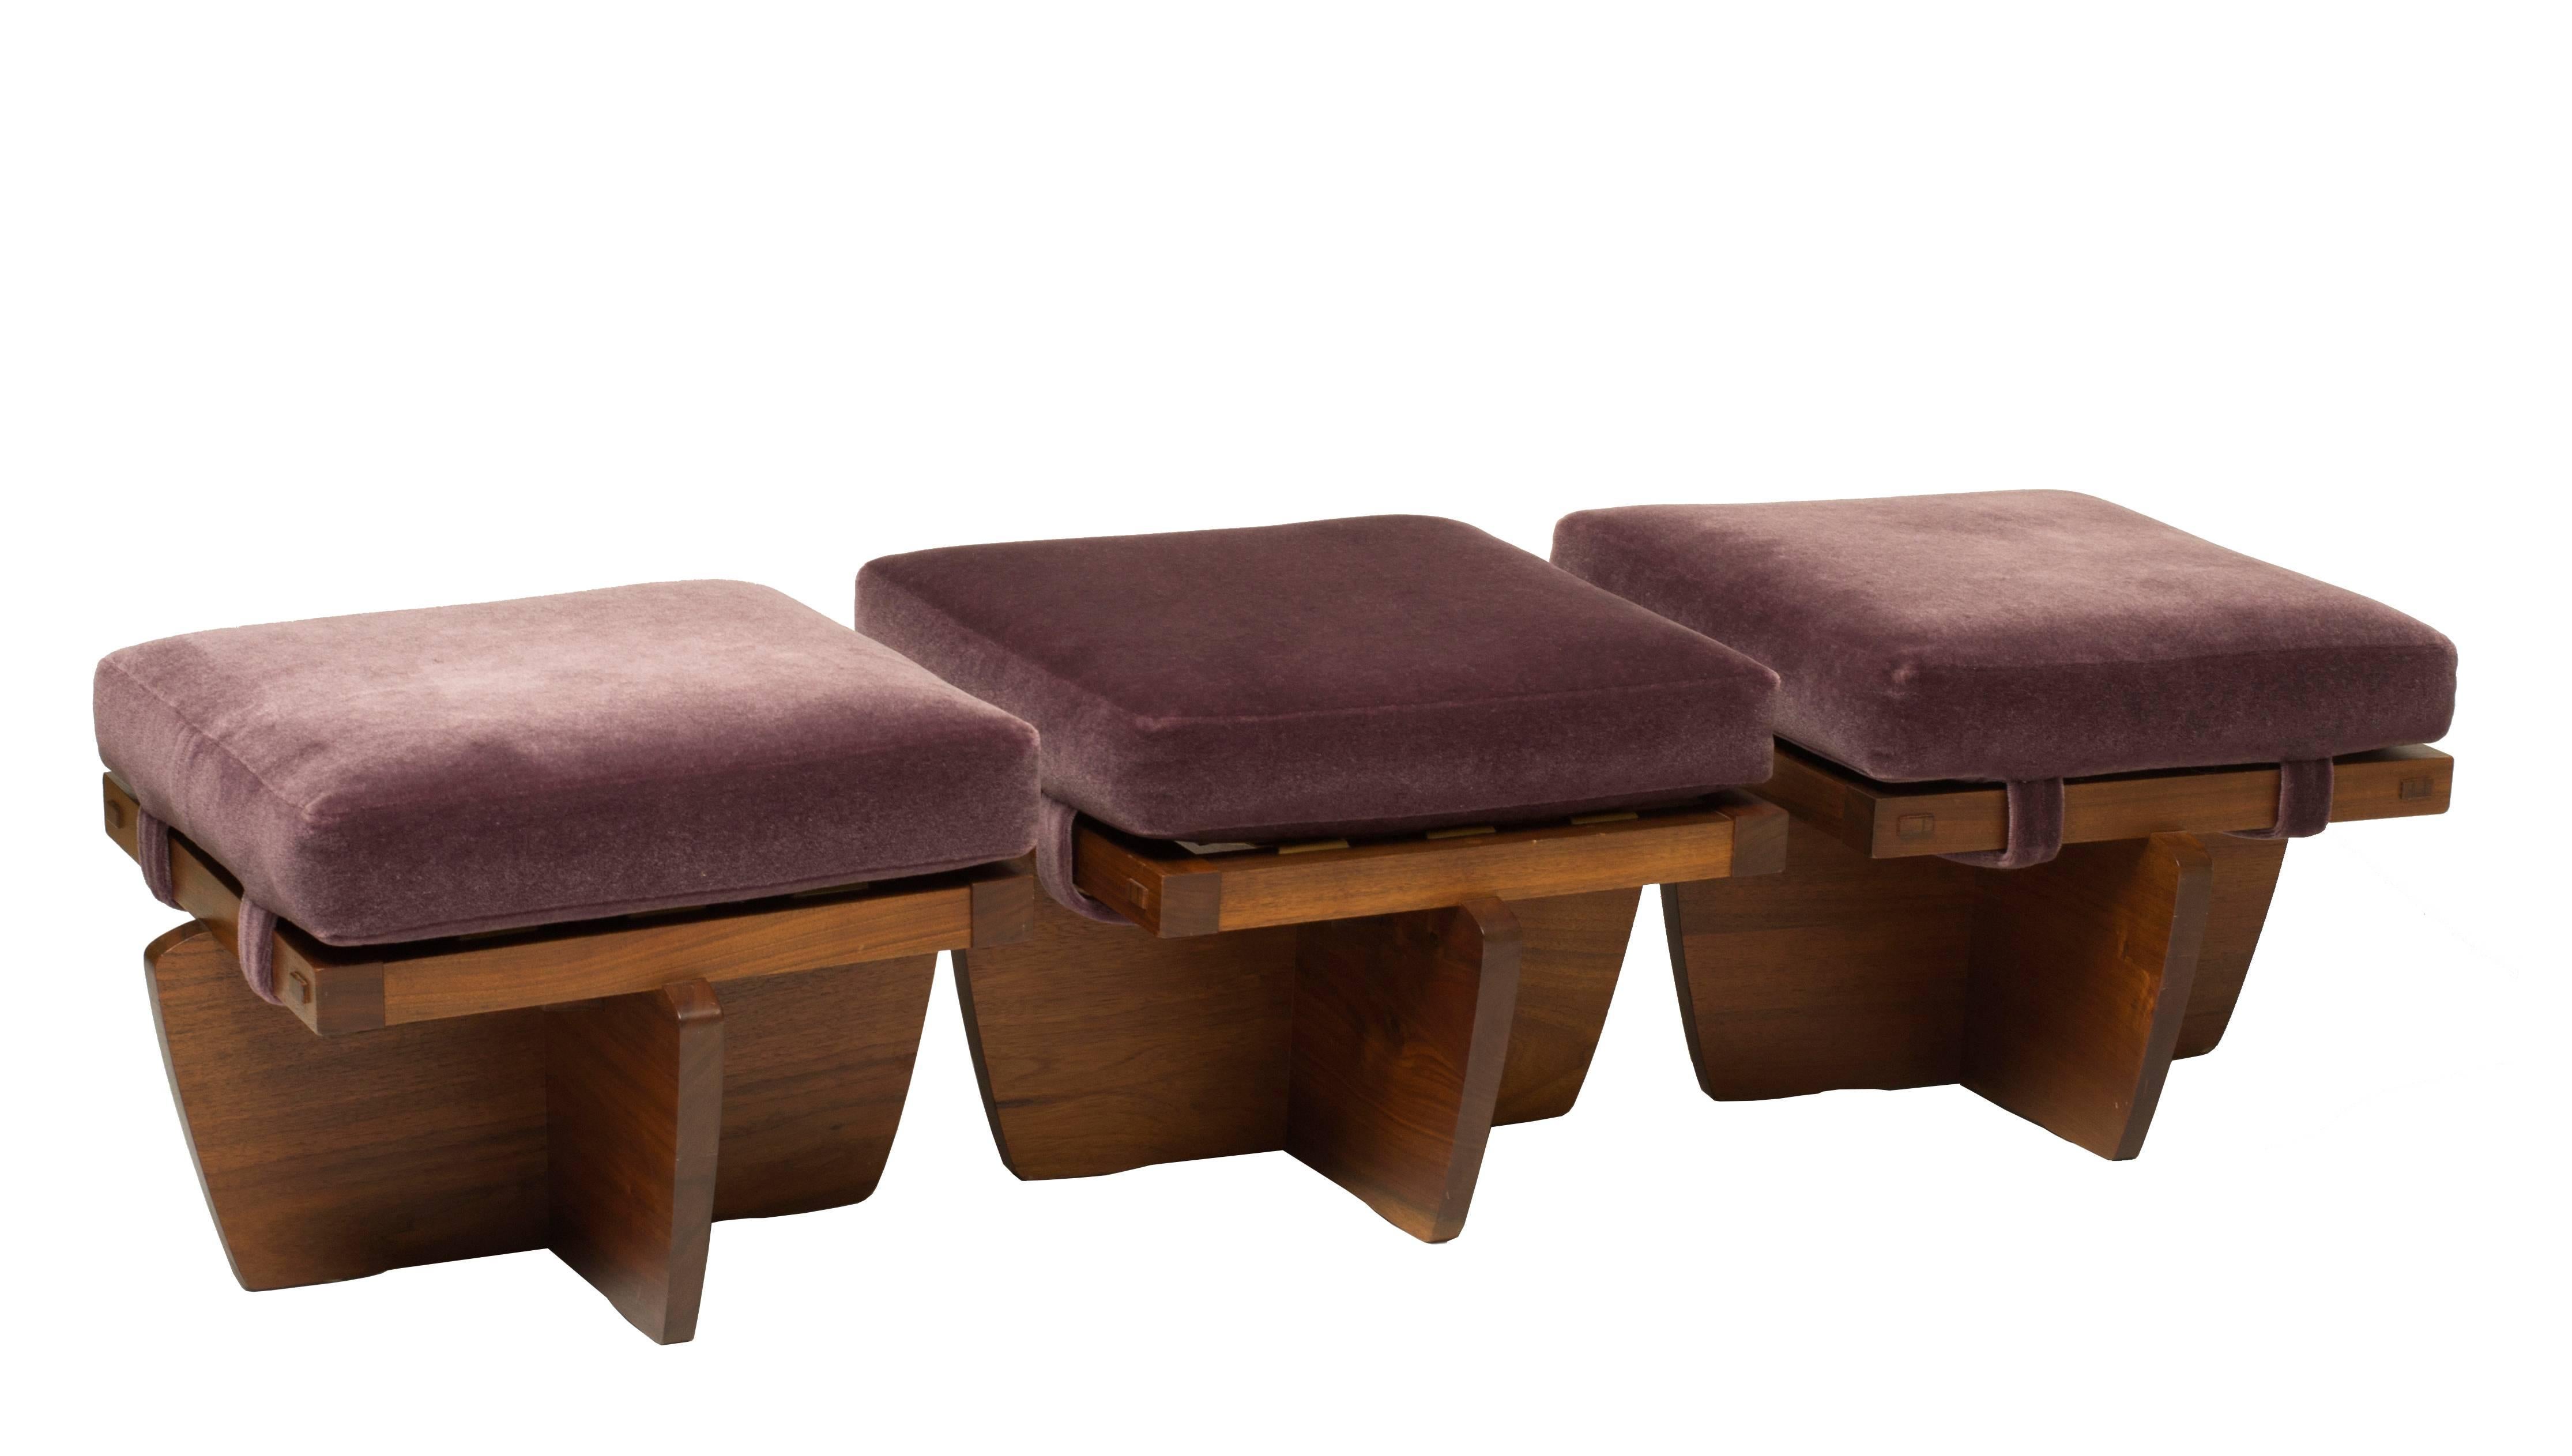 Three matching Nakashima Greenrock ottomans. Produced in 1997, these beautiful Walnut stools feature the original purple velvet upholstery. Each Ottoman is sIgned "Nakashima", numbered, dated and authenticated by the Nakashima Studio.